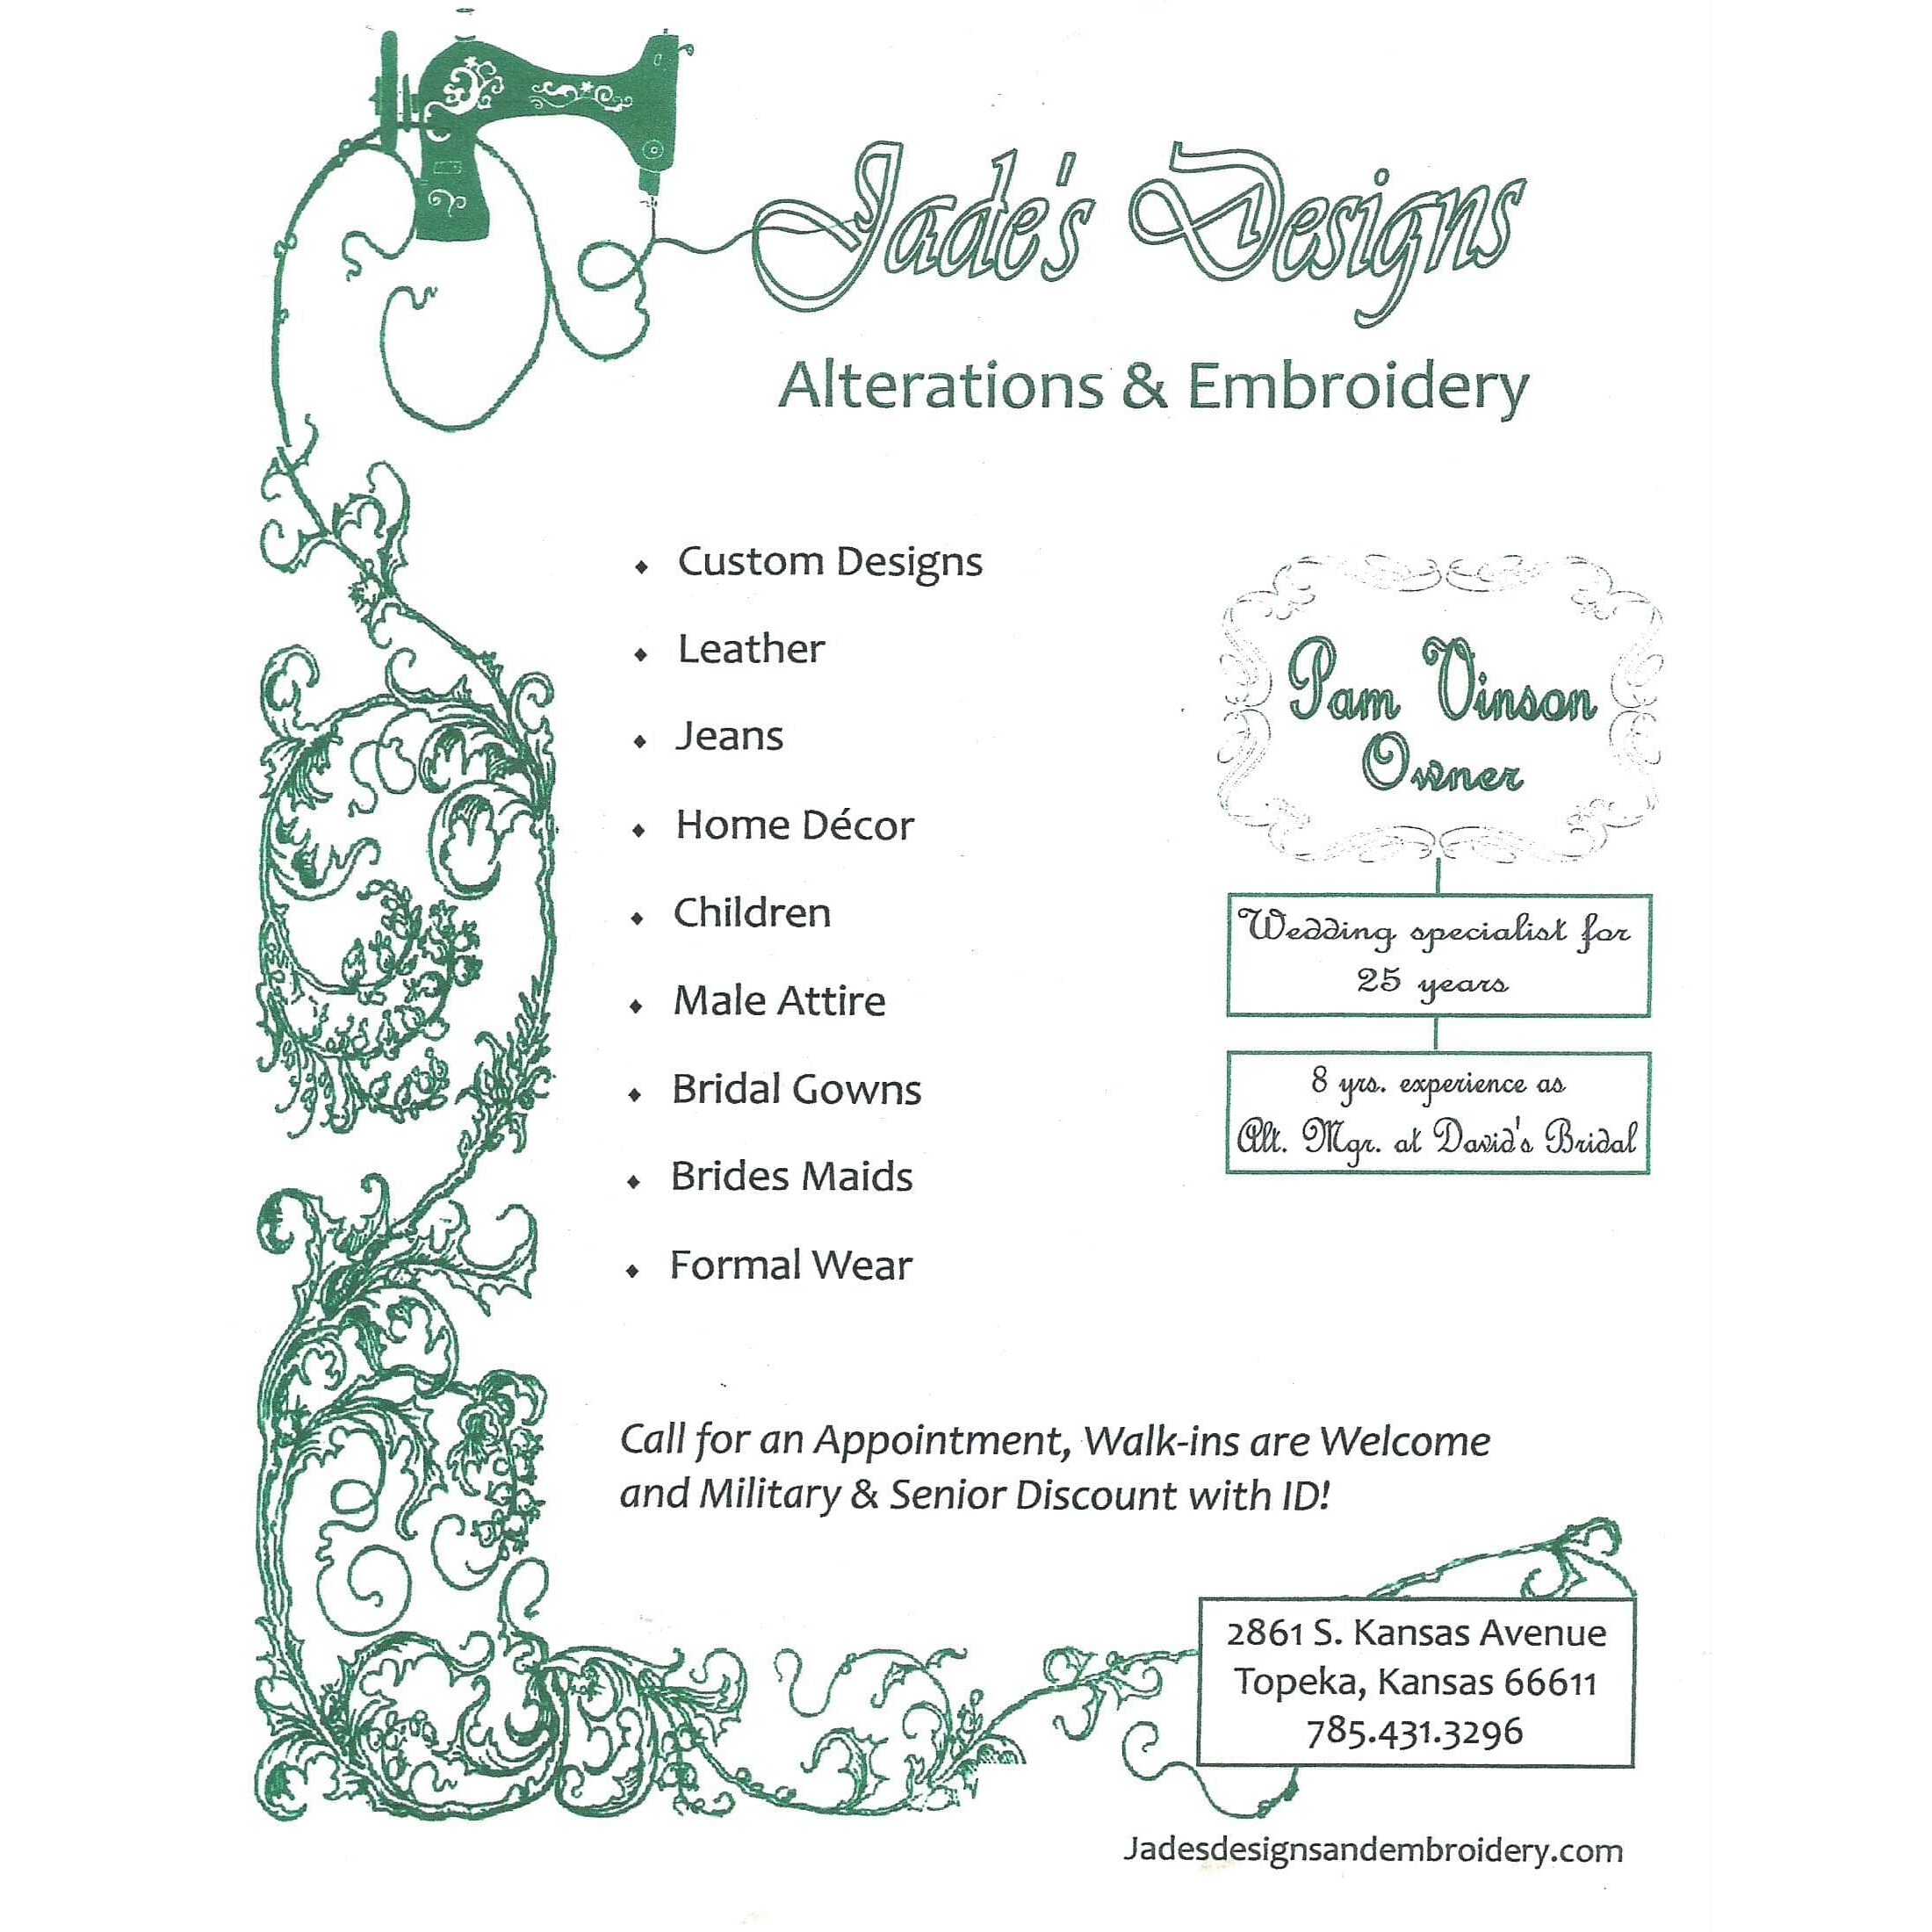 Jade's Designs Alterations & Embroidery LLC Photo